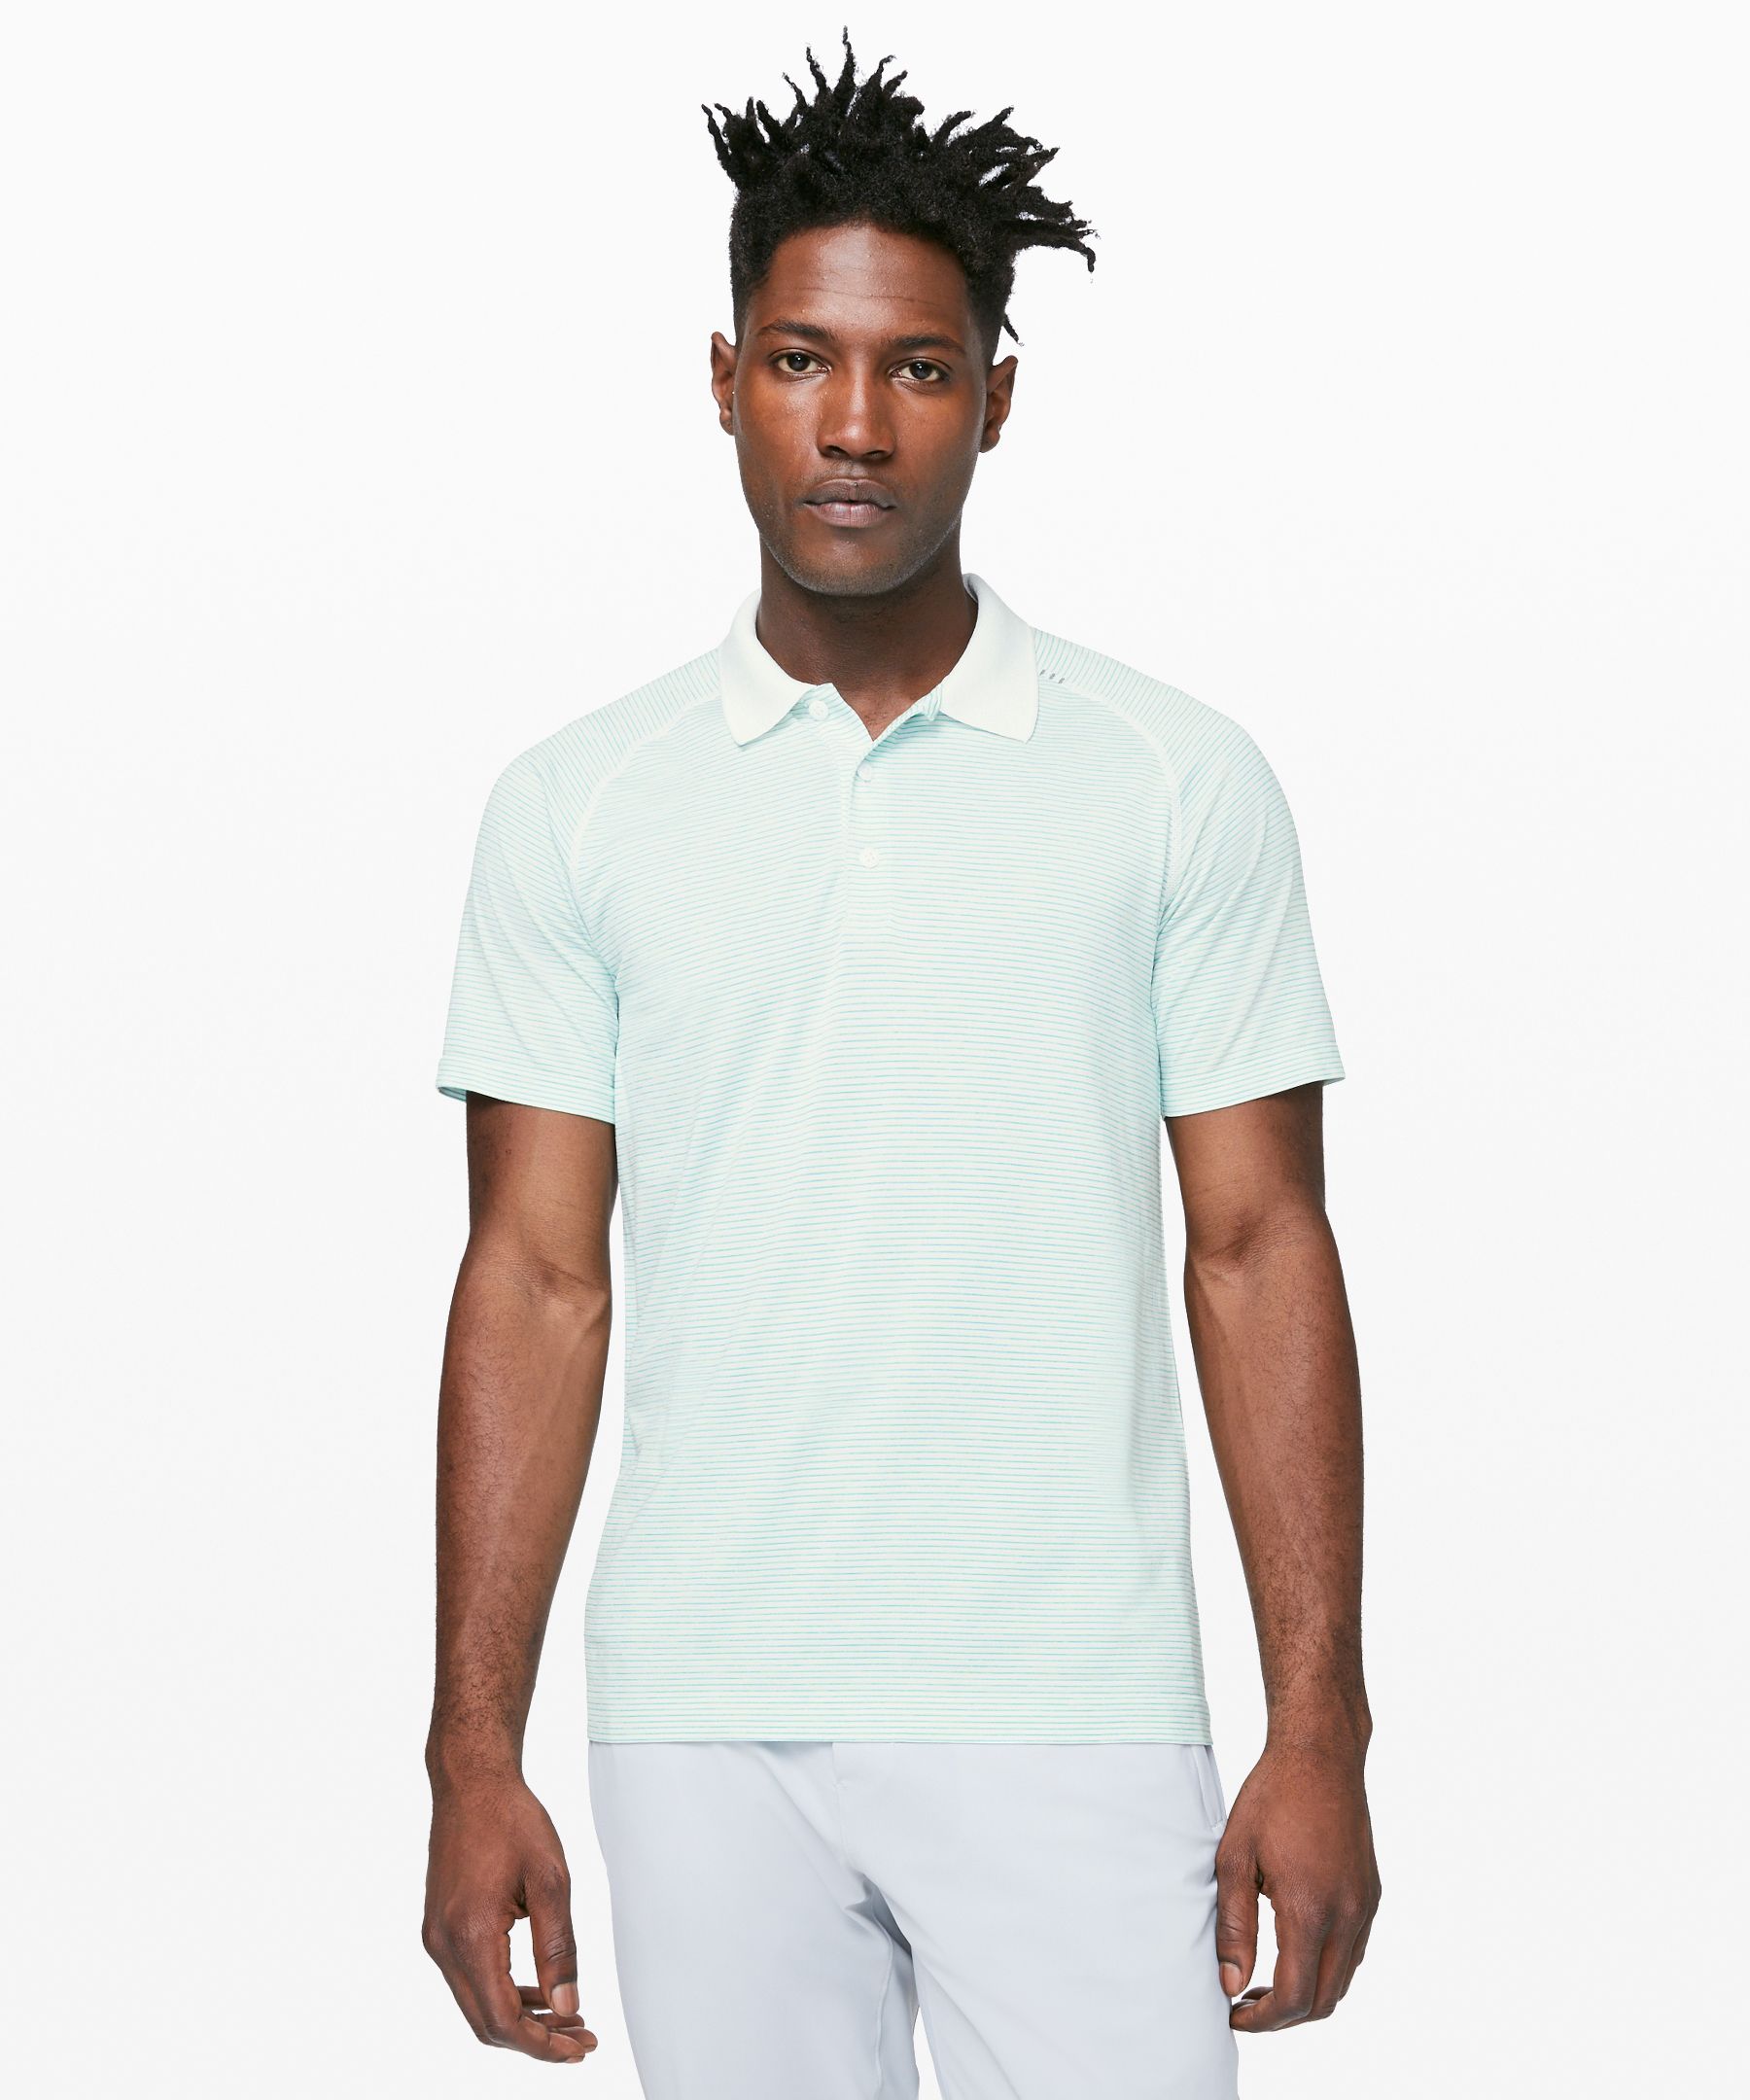 Lululemon Metal Vent Tech Polo In White/white/blue/lime